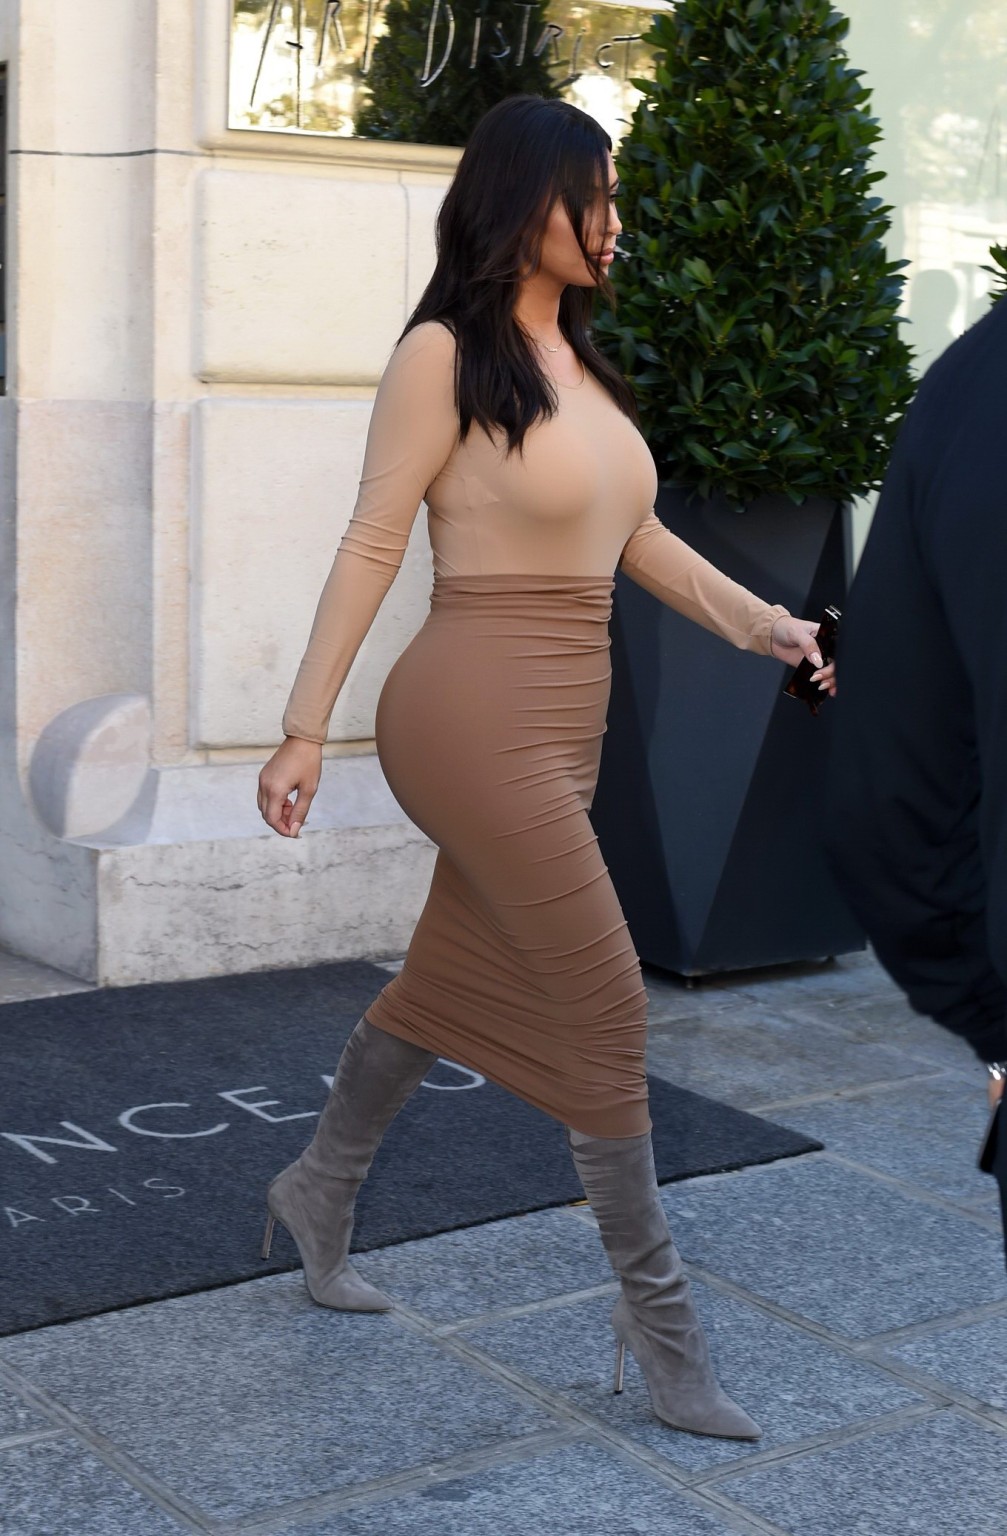 Kim Kardashian shows off her curvy body wearing tight top and skirt outside Le R #75184940